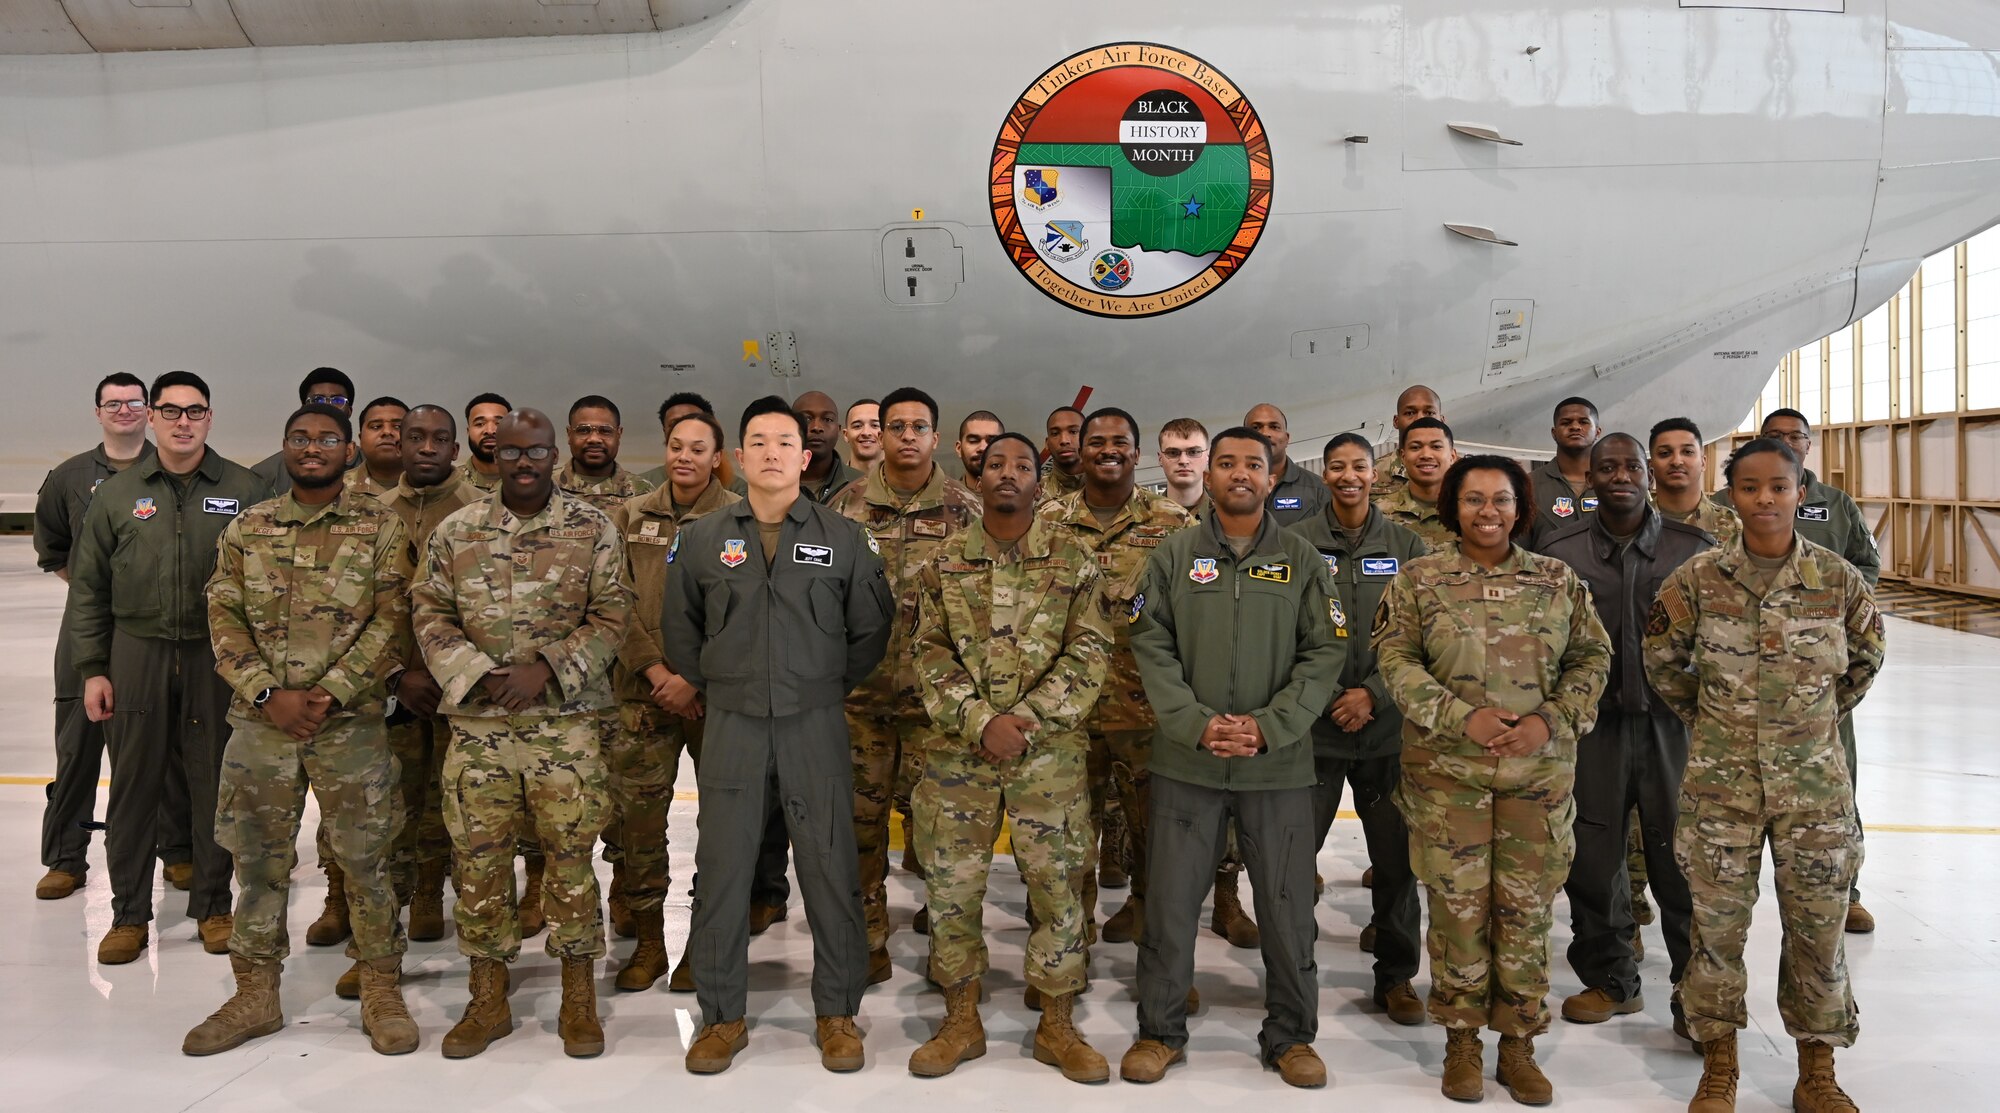 group photo in front of the E-3 jet